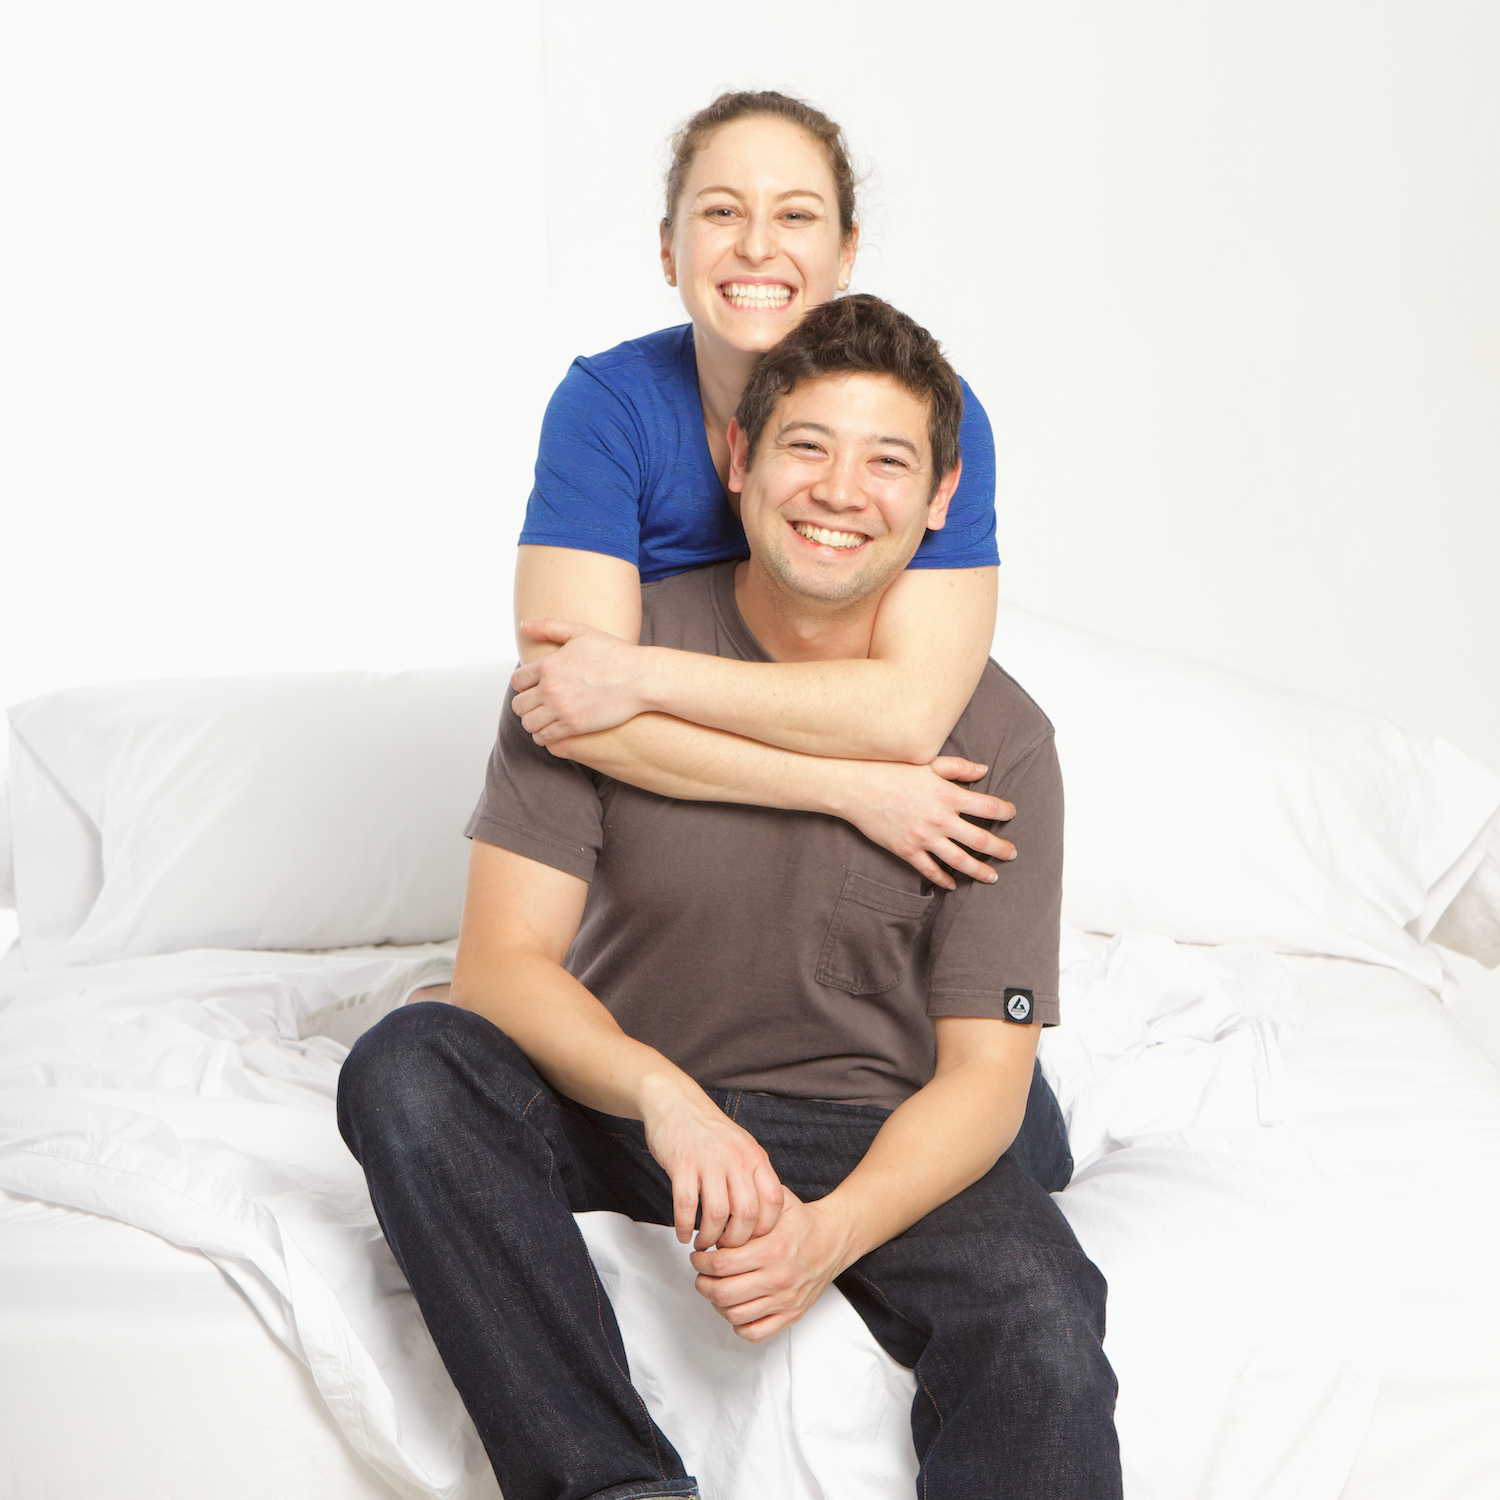 Authenticity50 co-founders Jimmy and Steph sitting on their very own made in usa signature bed sheets made using the very best american grown cotton